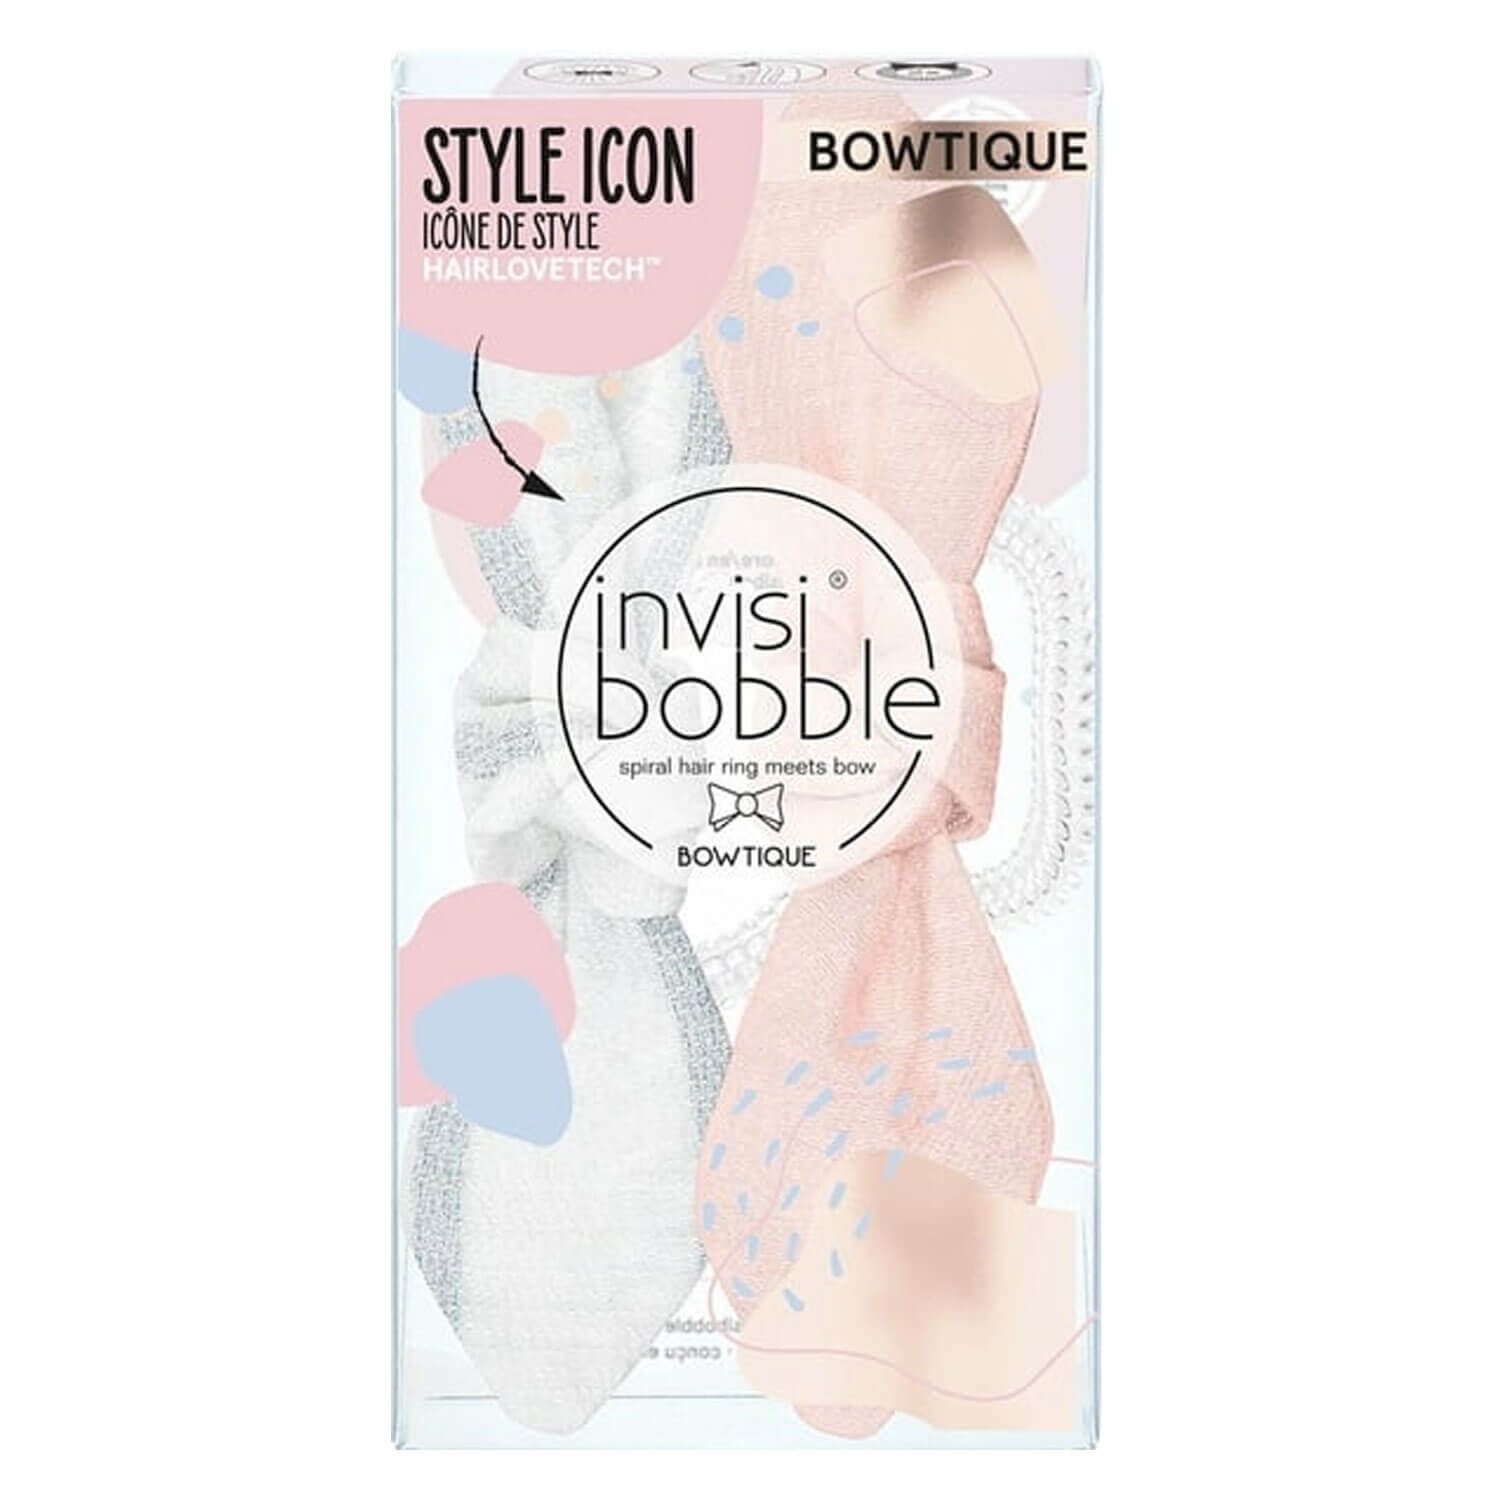 Product image from invisibobble BOWTIQUE - Duo Nordic Breeze Summer Lemming Go